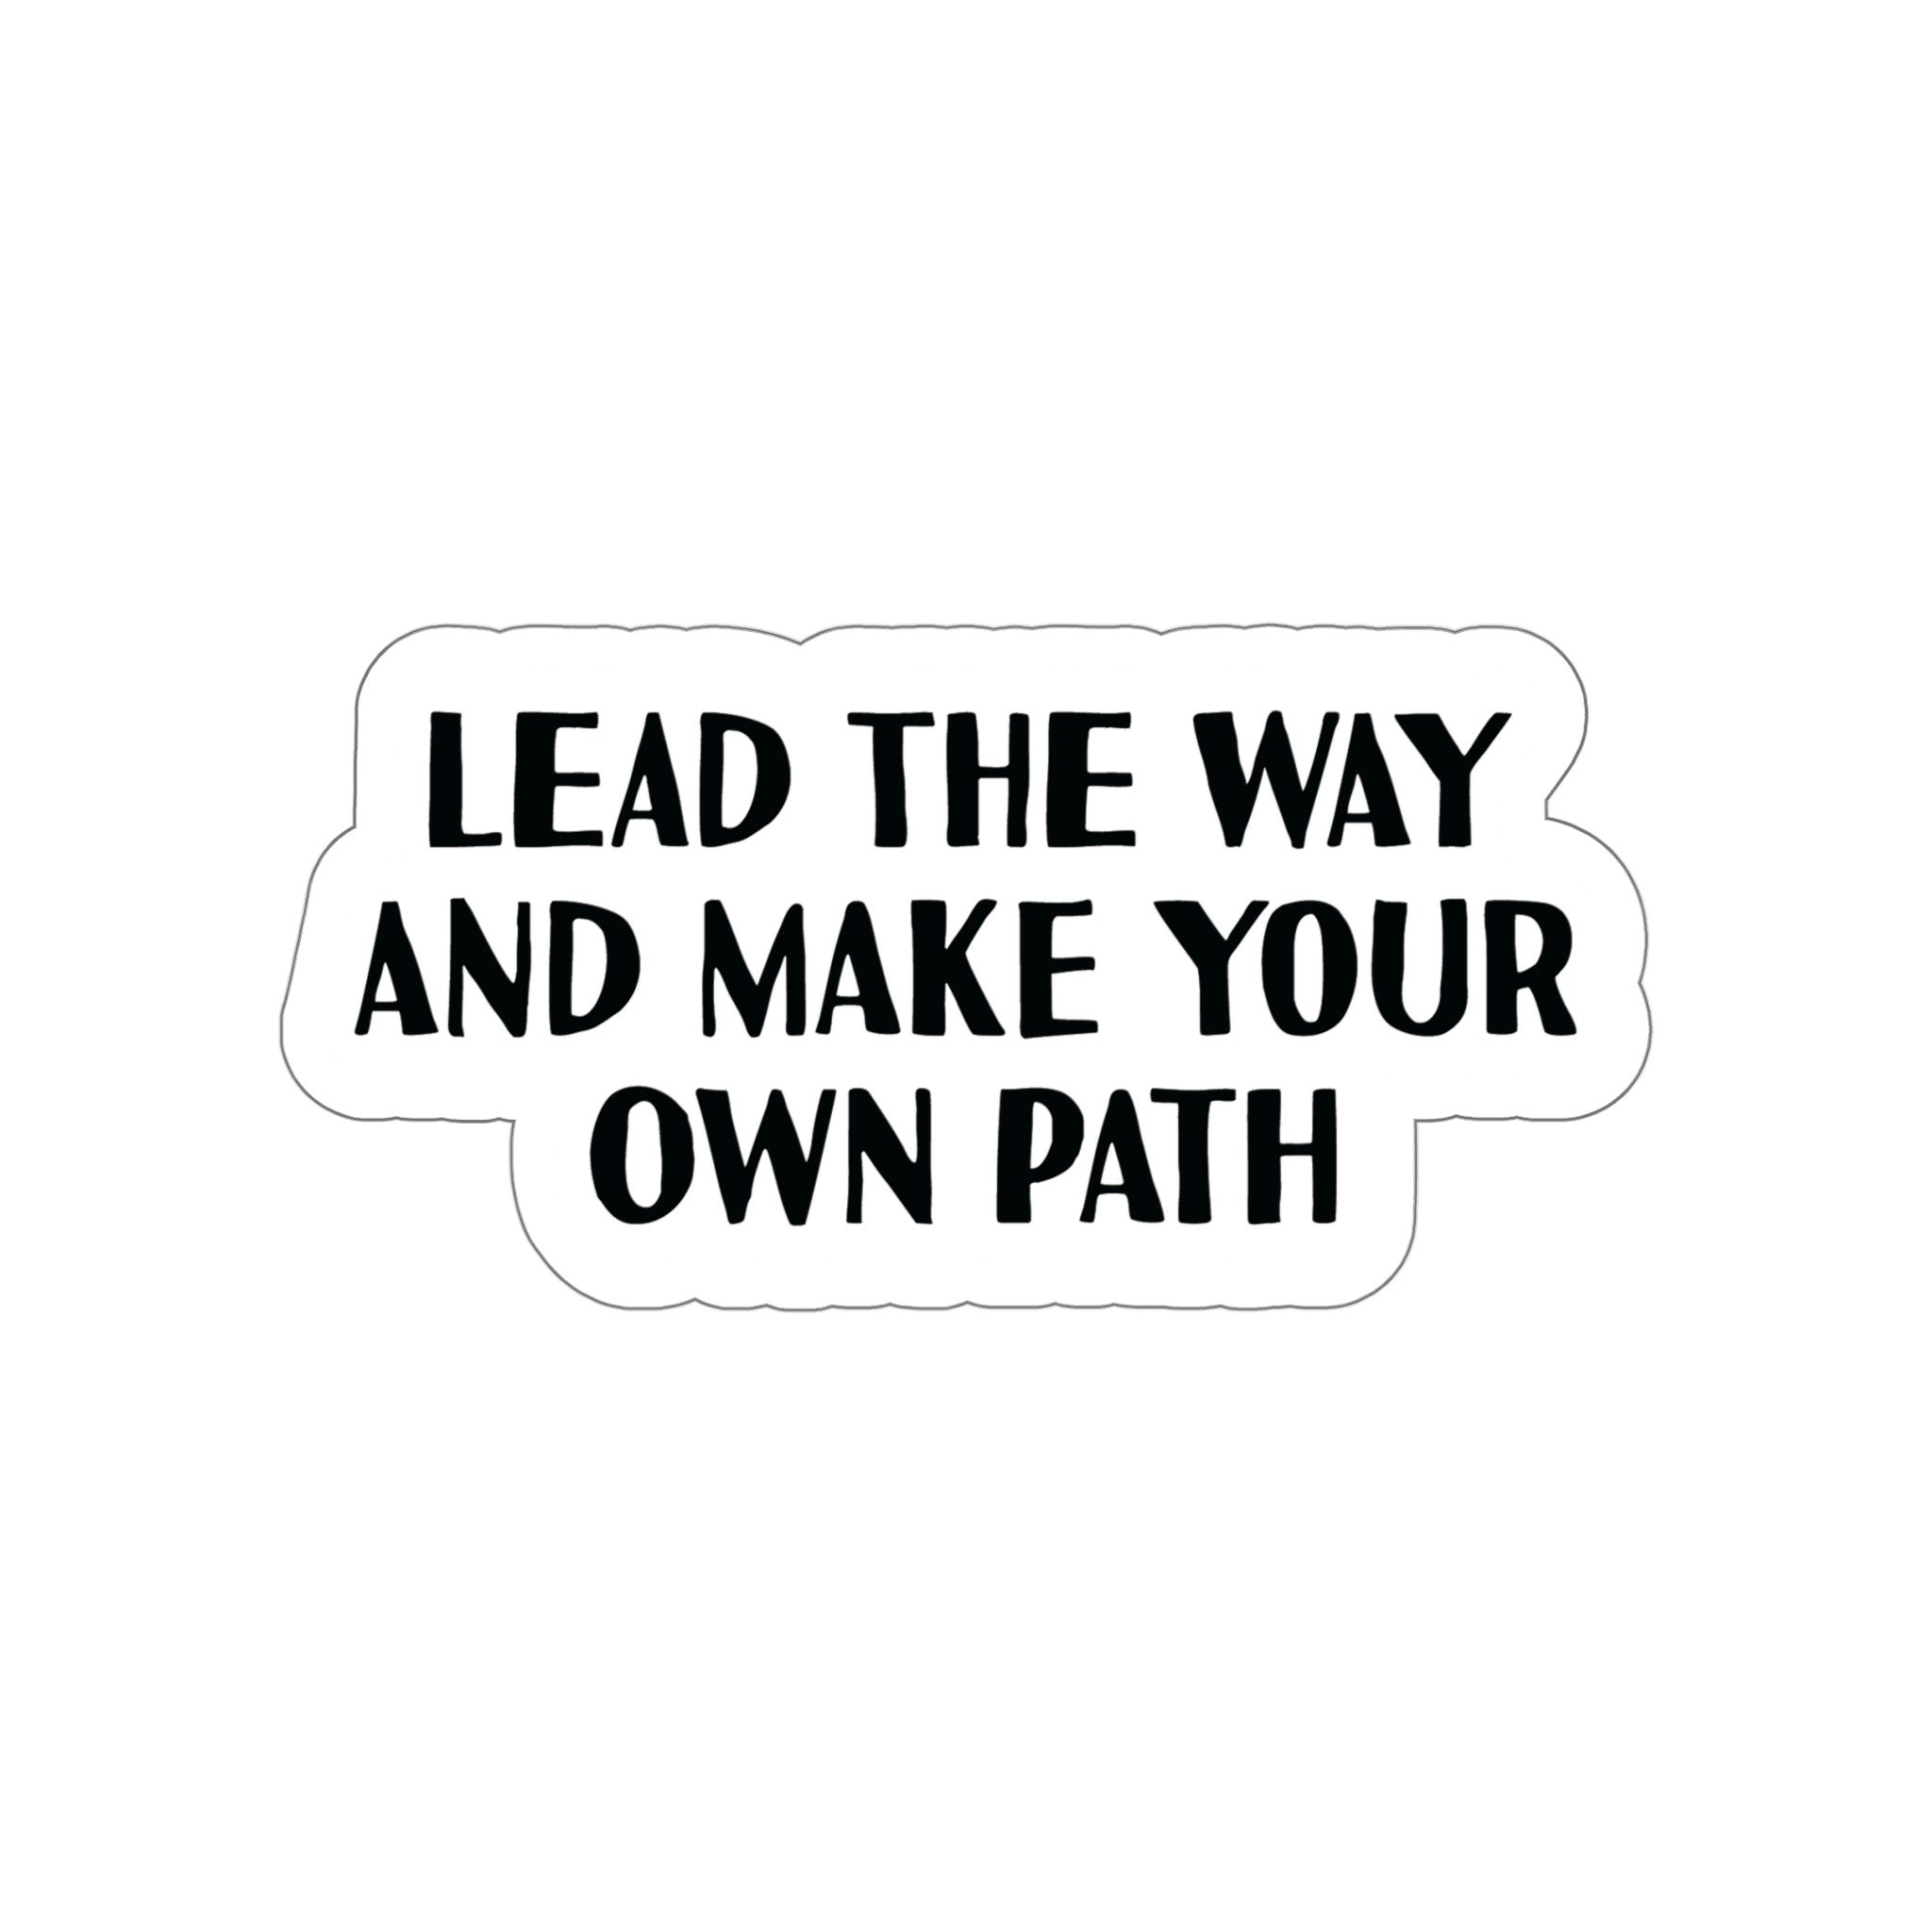 Lead the way and make your own path | Shop motivational stickers #size_6x6-inches